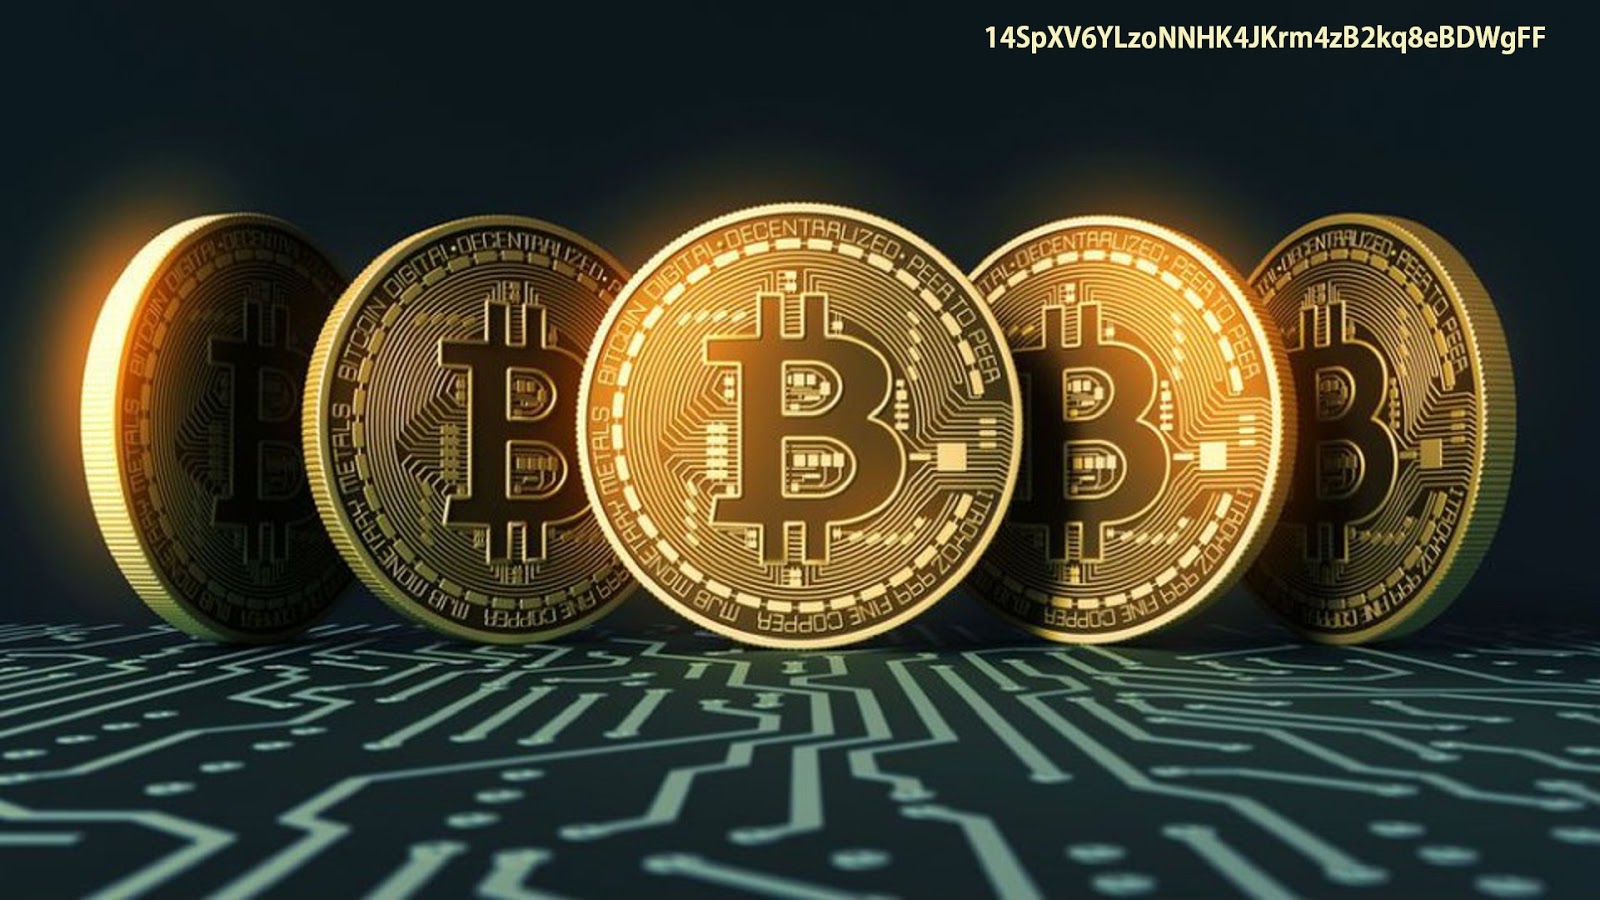  download Bitcoin Wallpapers and Background Images stmednet 1600x900